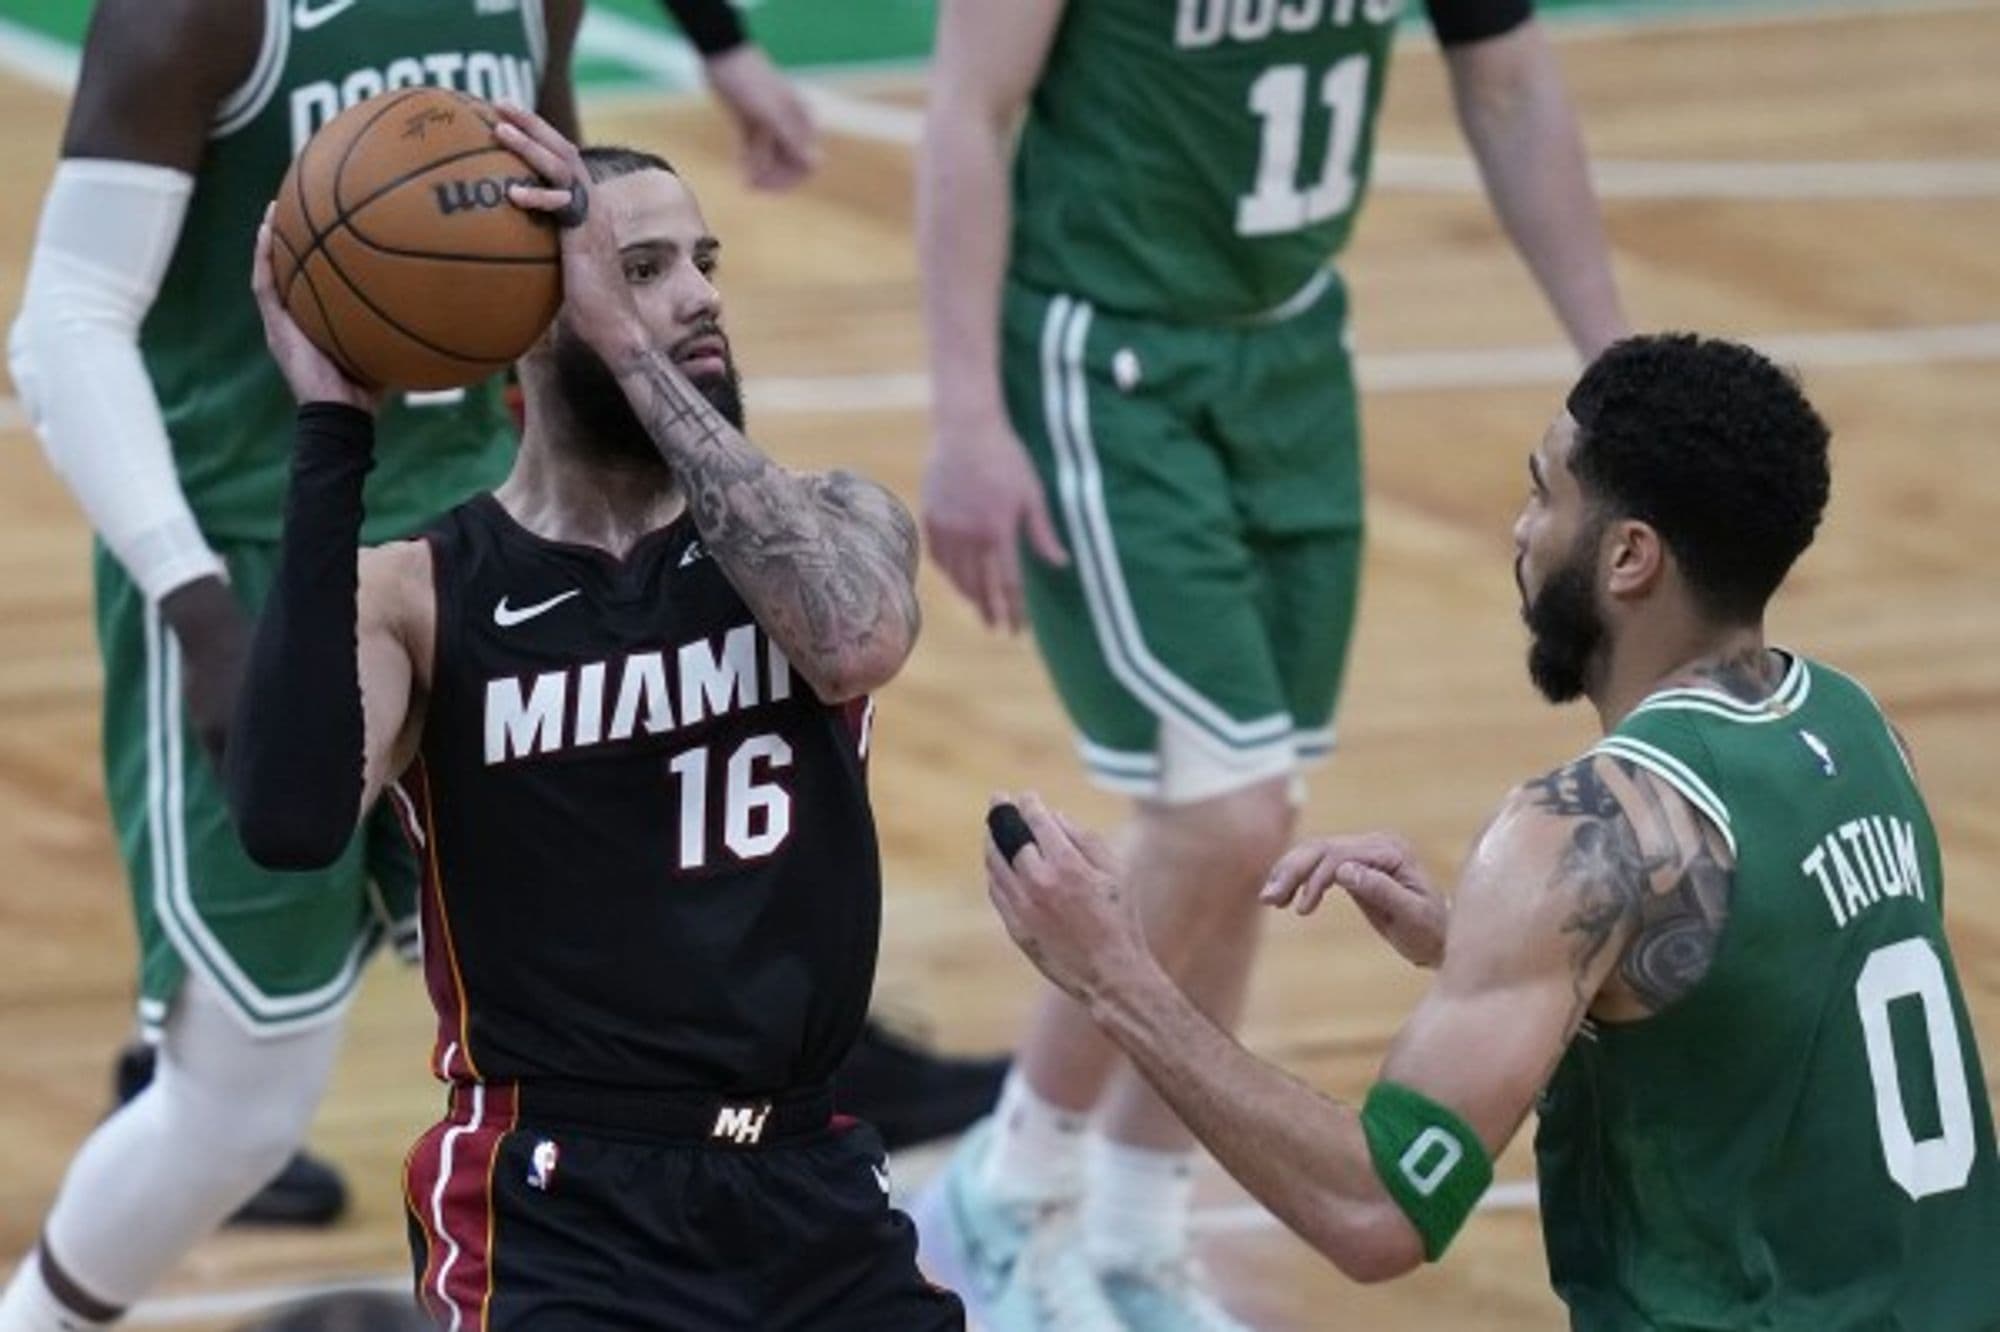 # **Miami Heat Bounce Back with Record 3-Pointers Against Boston Celtics**